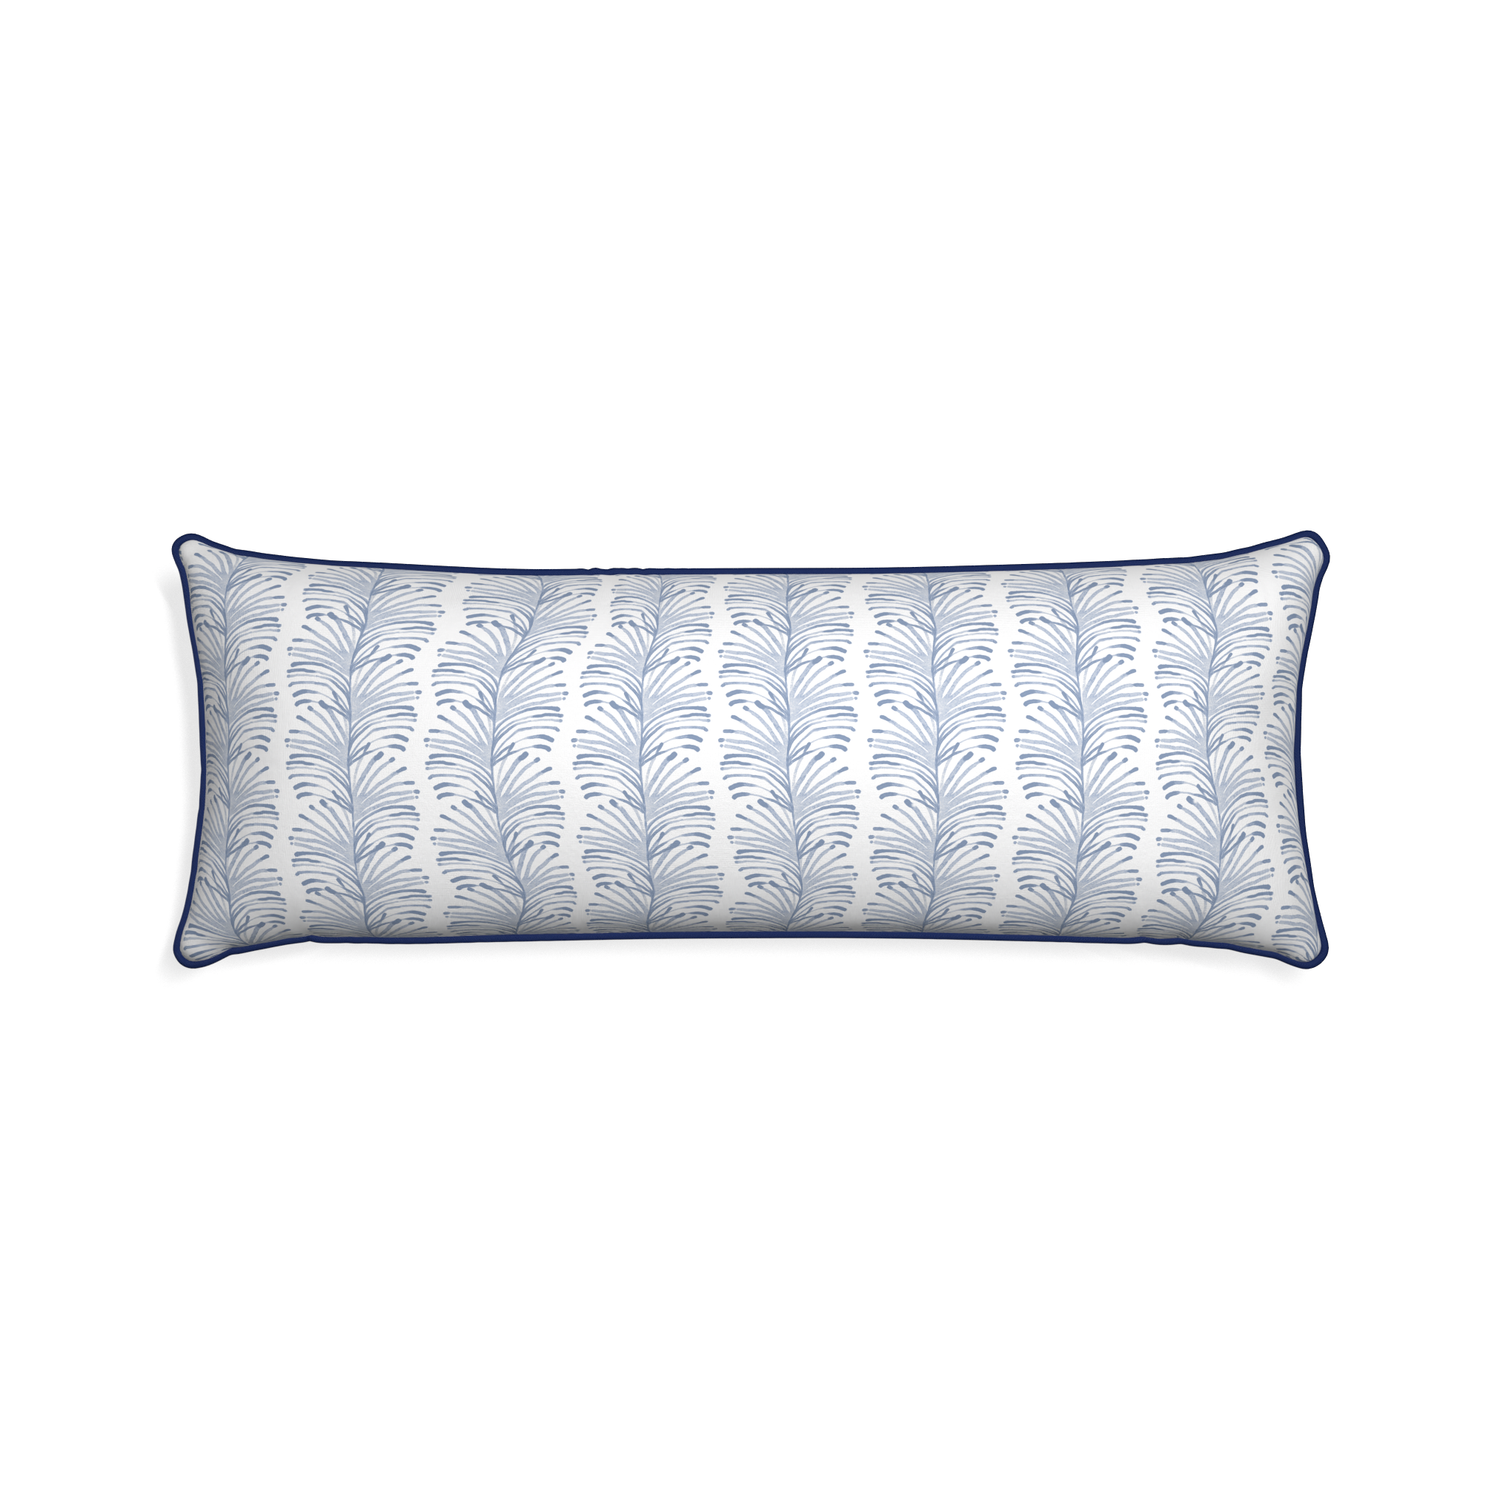 Xl-lumbar emma sky custom pillow with midnight piping on white background